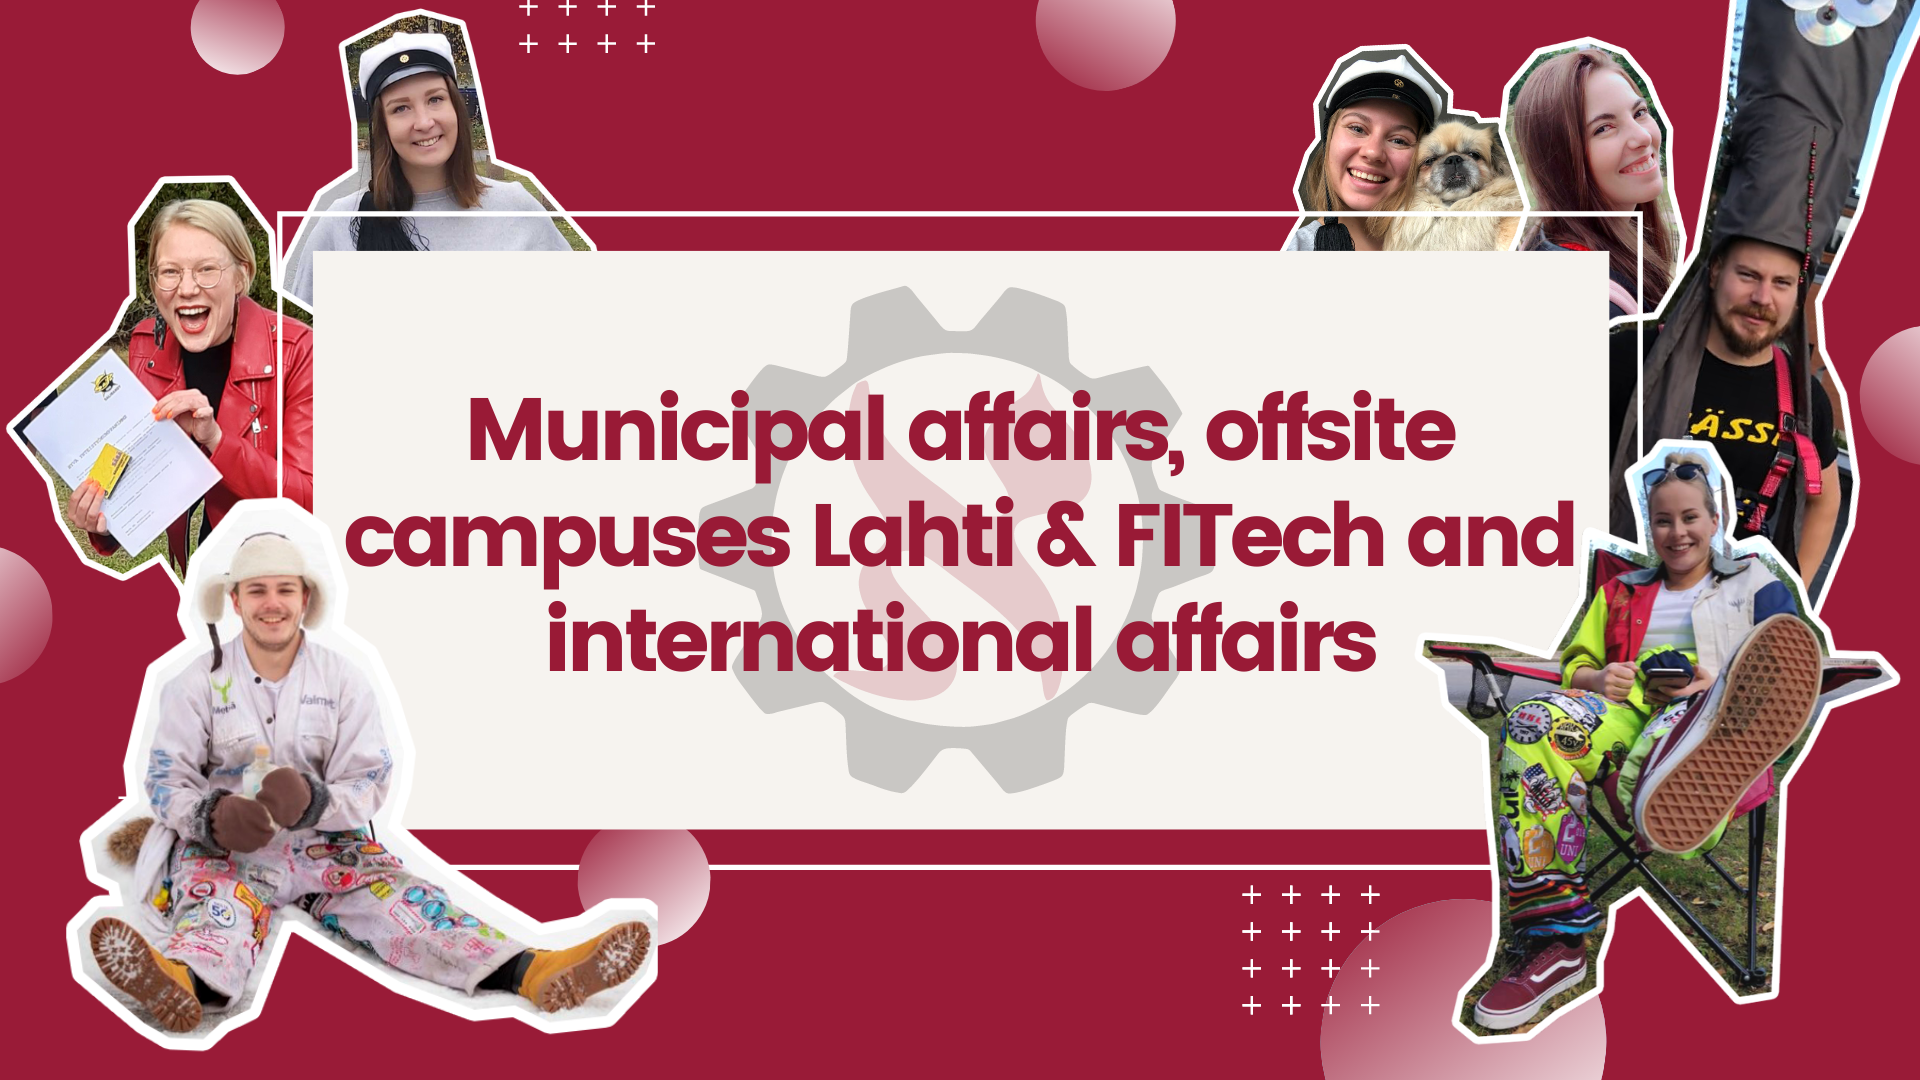 Municipal affairs, offsite campuses Lahti & FITech and international affairs